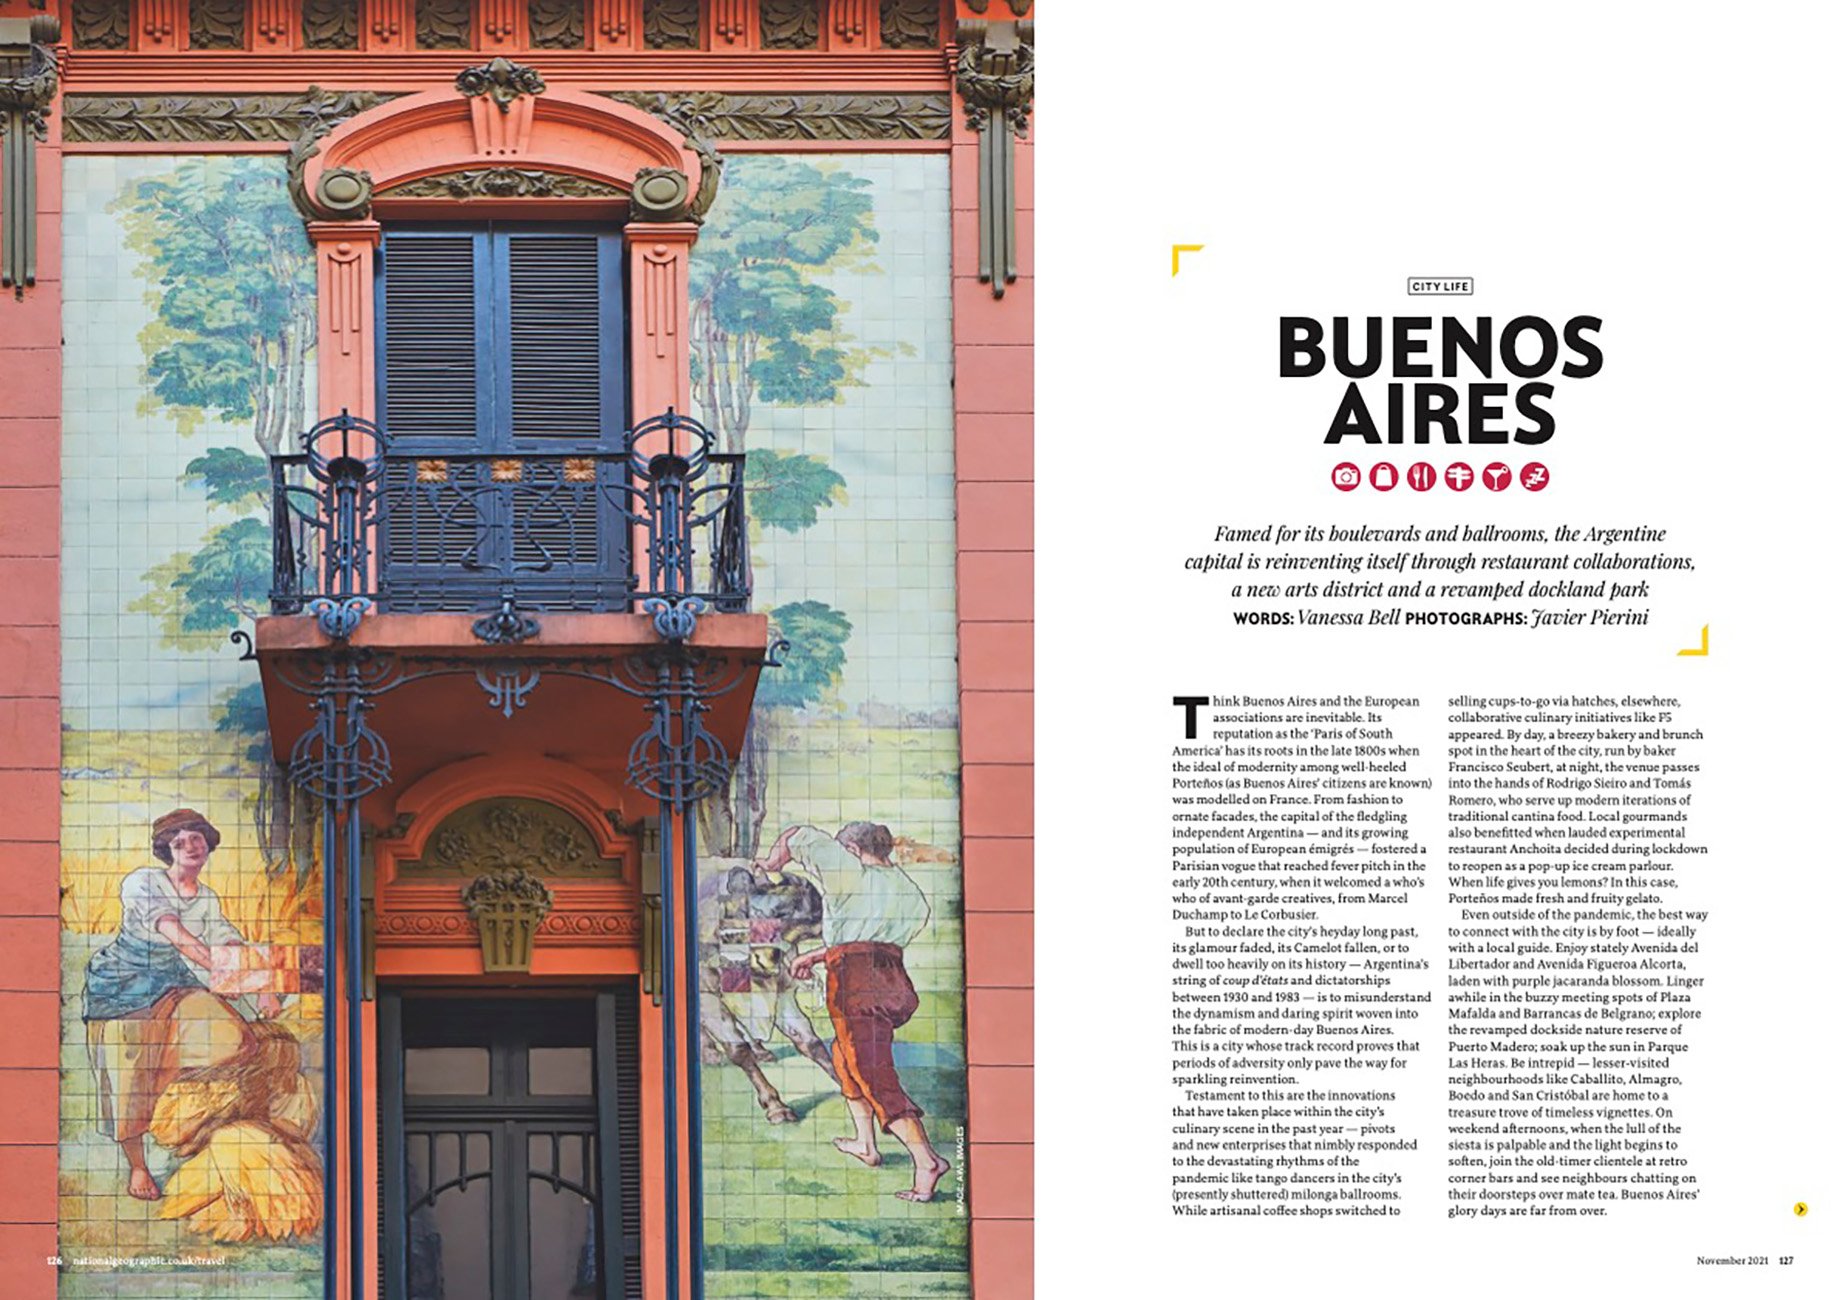 Tearsheet of Buenos Aires shot by Javier Pierini for National Geographic UK 